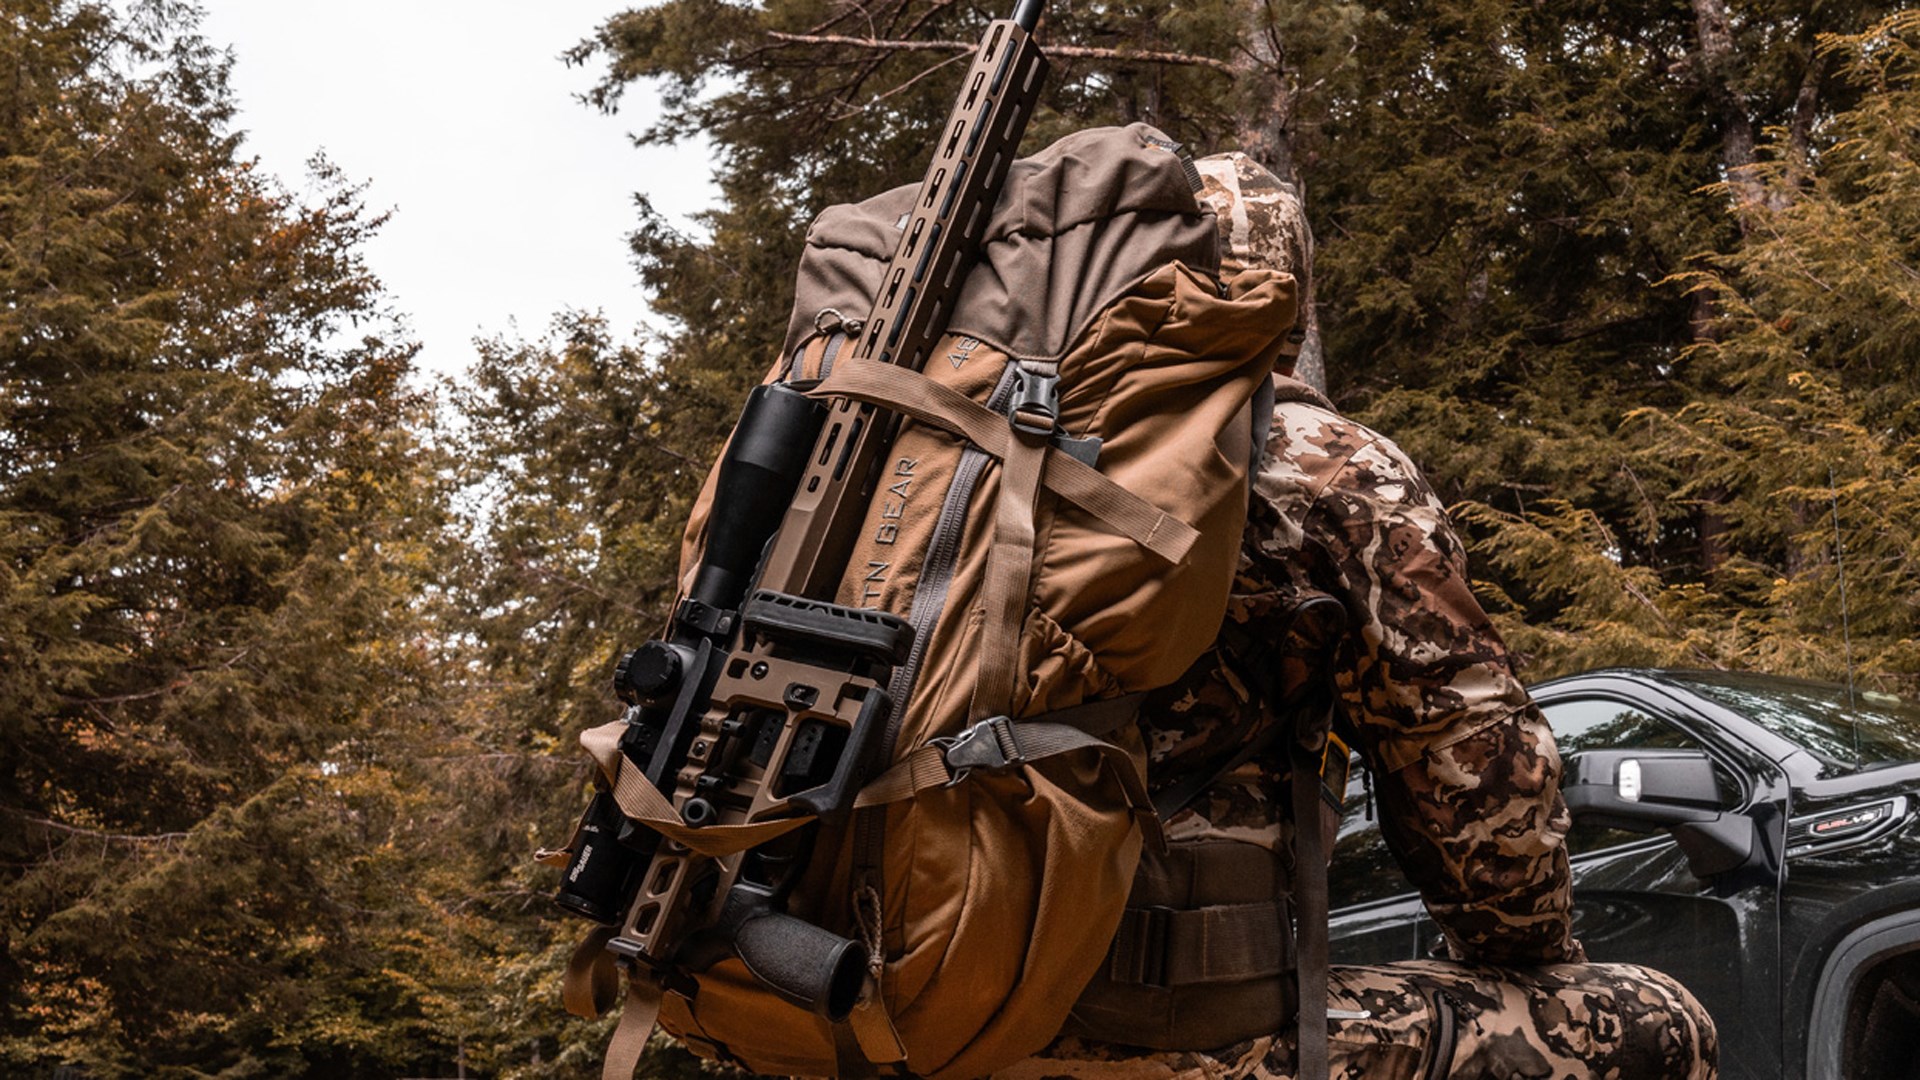 A SIG Sauer Cross Magnum is stowed on a hunter's backpack as he treks through the woods toward a black truck.